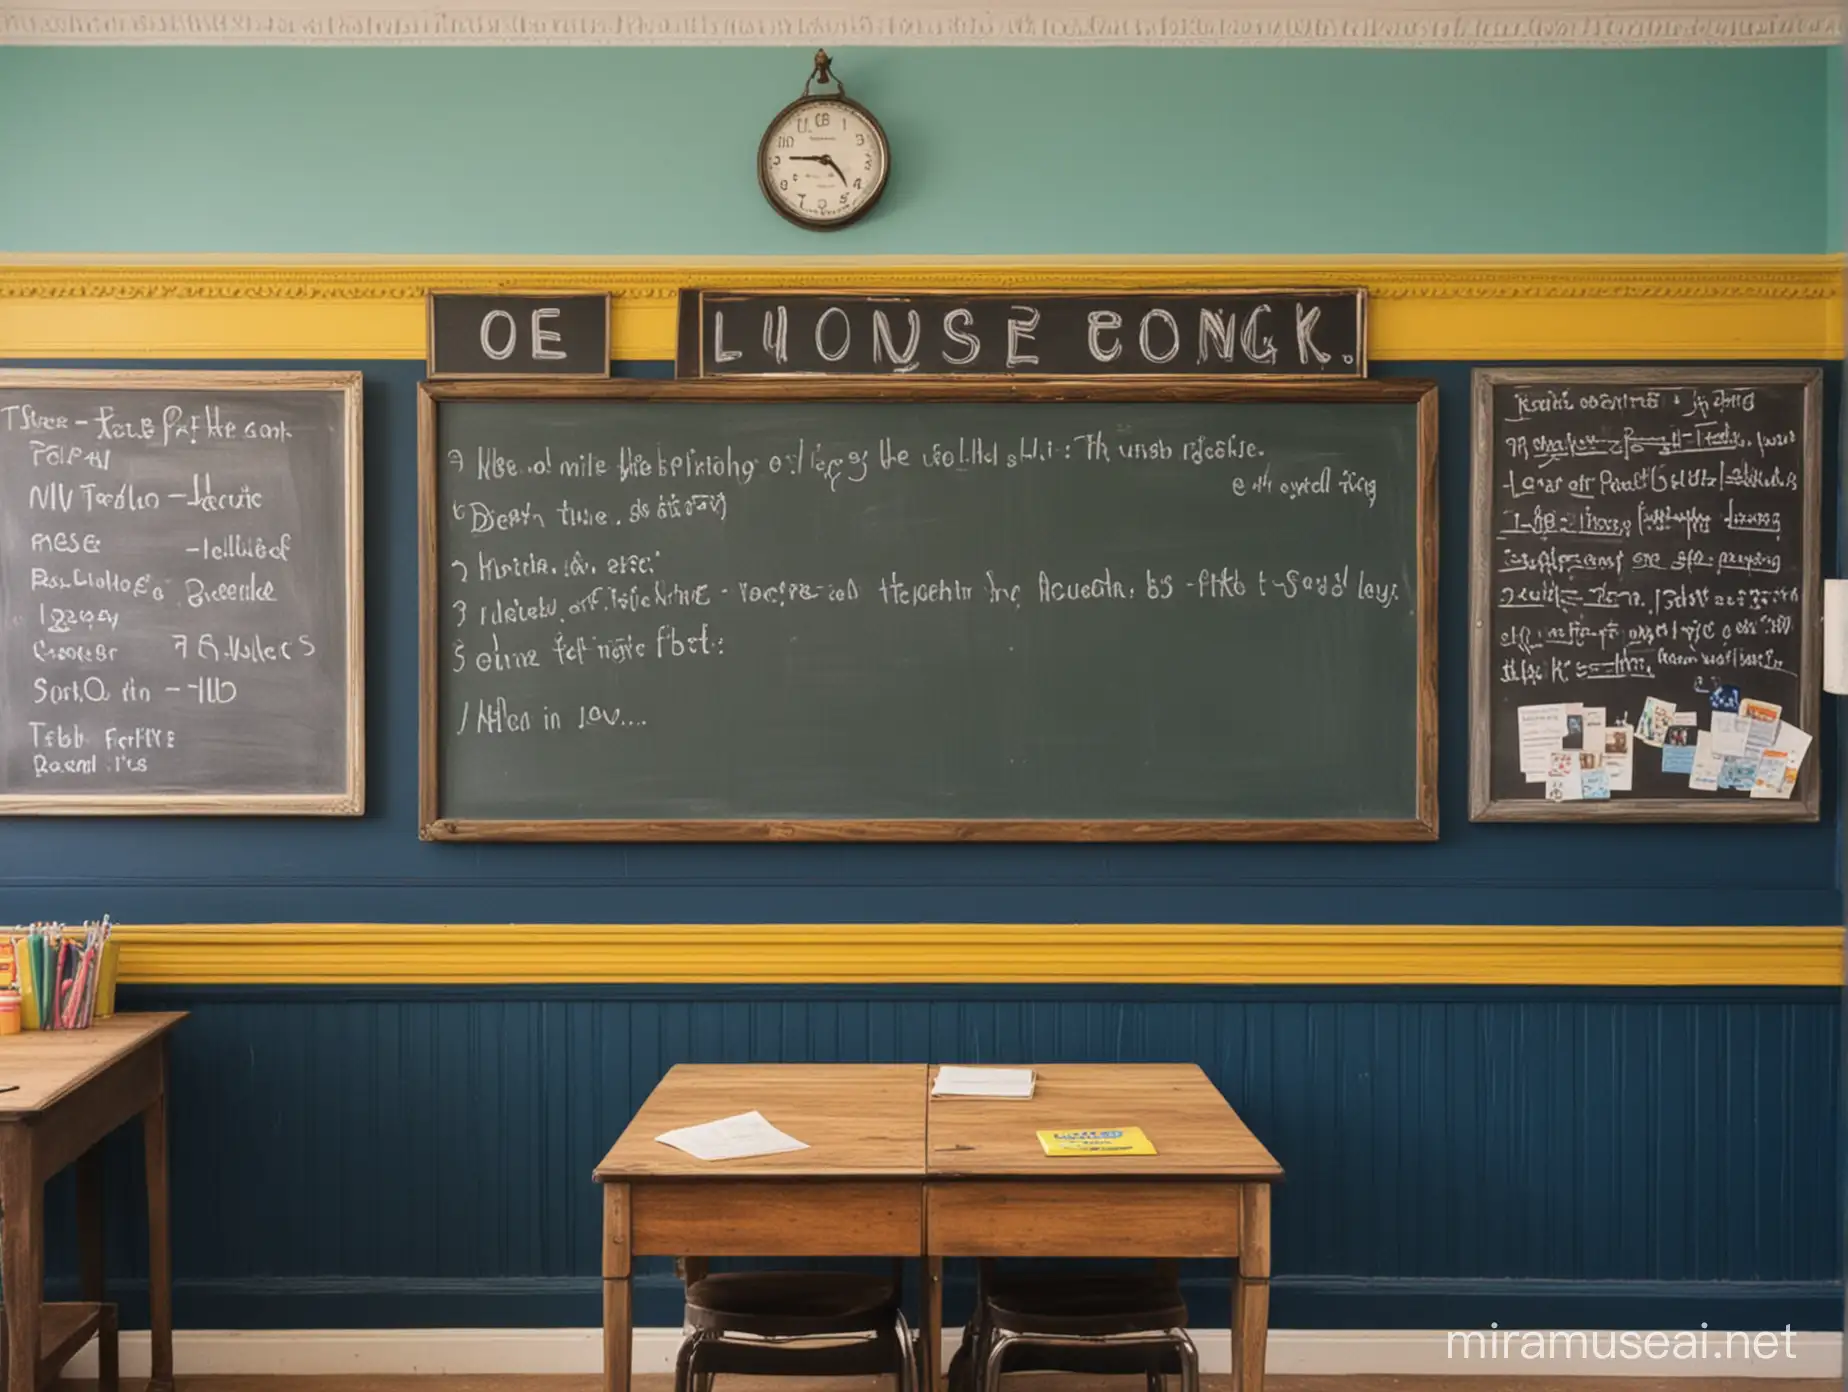 Wes Anderson Style Classroom Vibrant Blue Wainscoting and Sunny Yellow Walls with Central Chalkboard